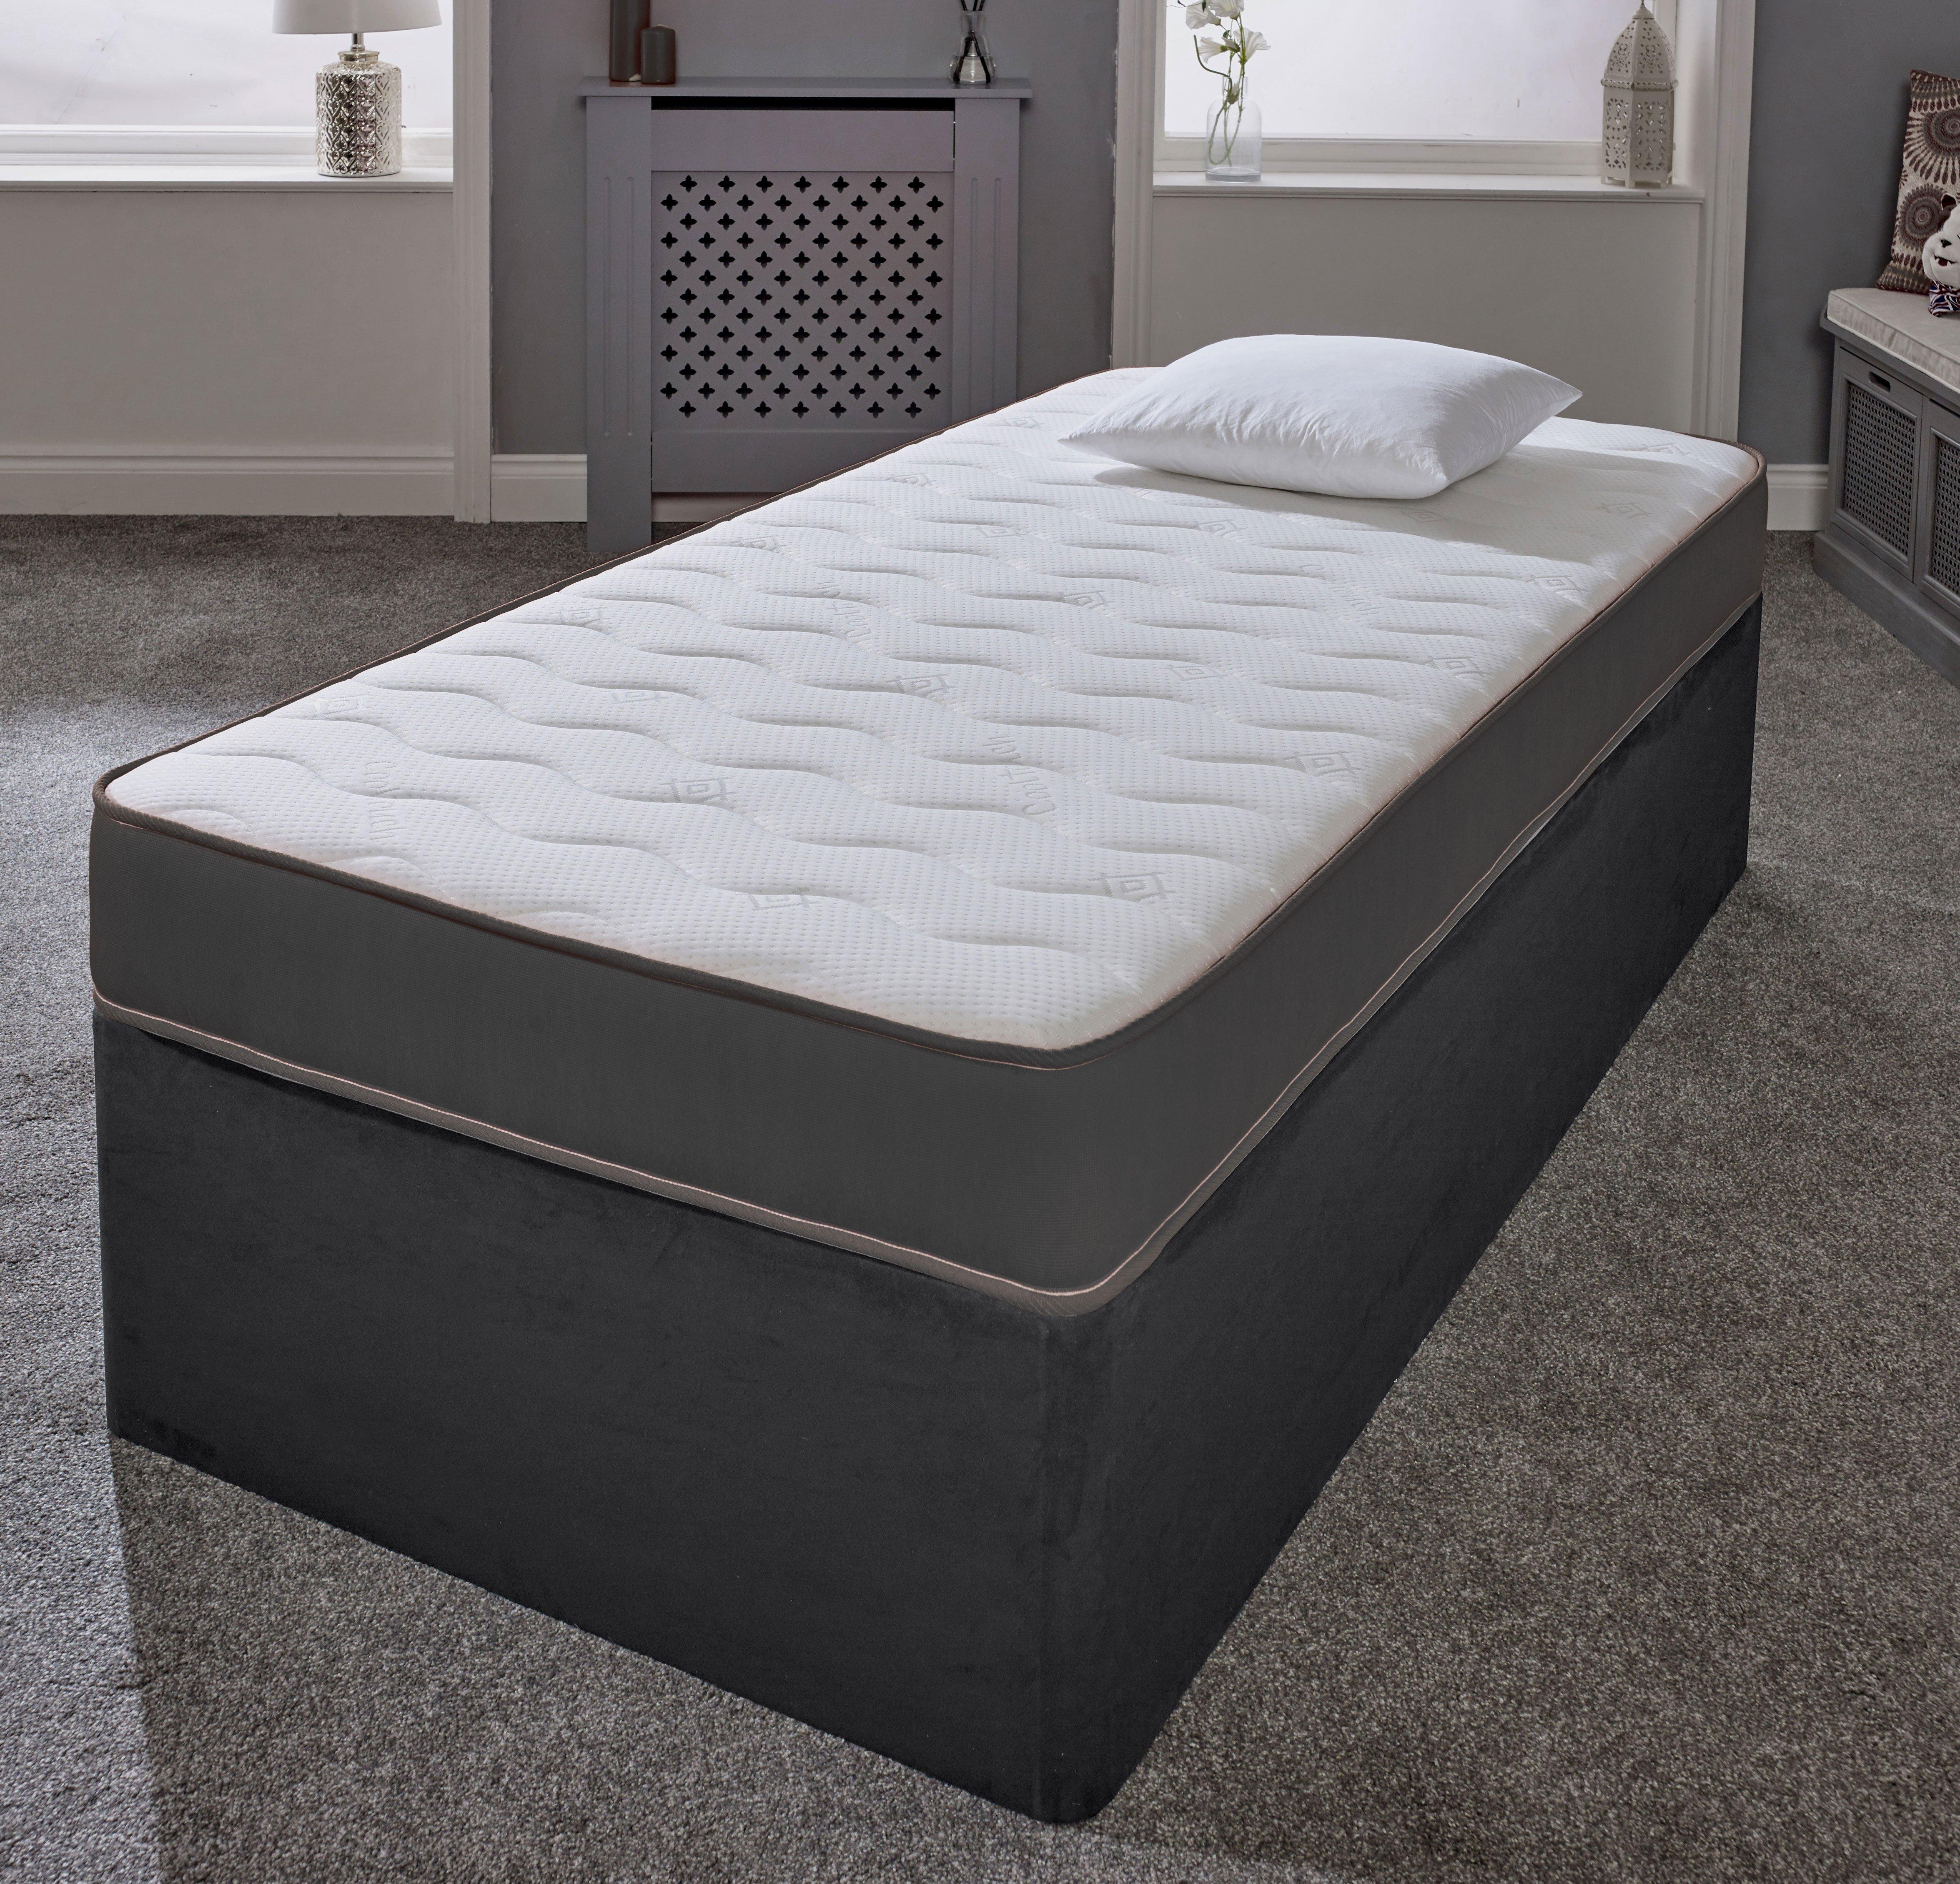 Cooltouch Essentials Wave Grey Border Quilted Hybrid Spring Mattress